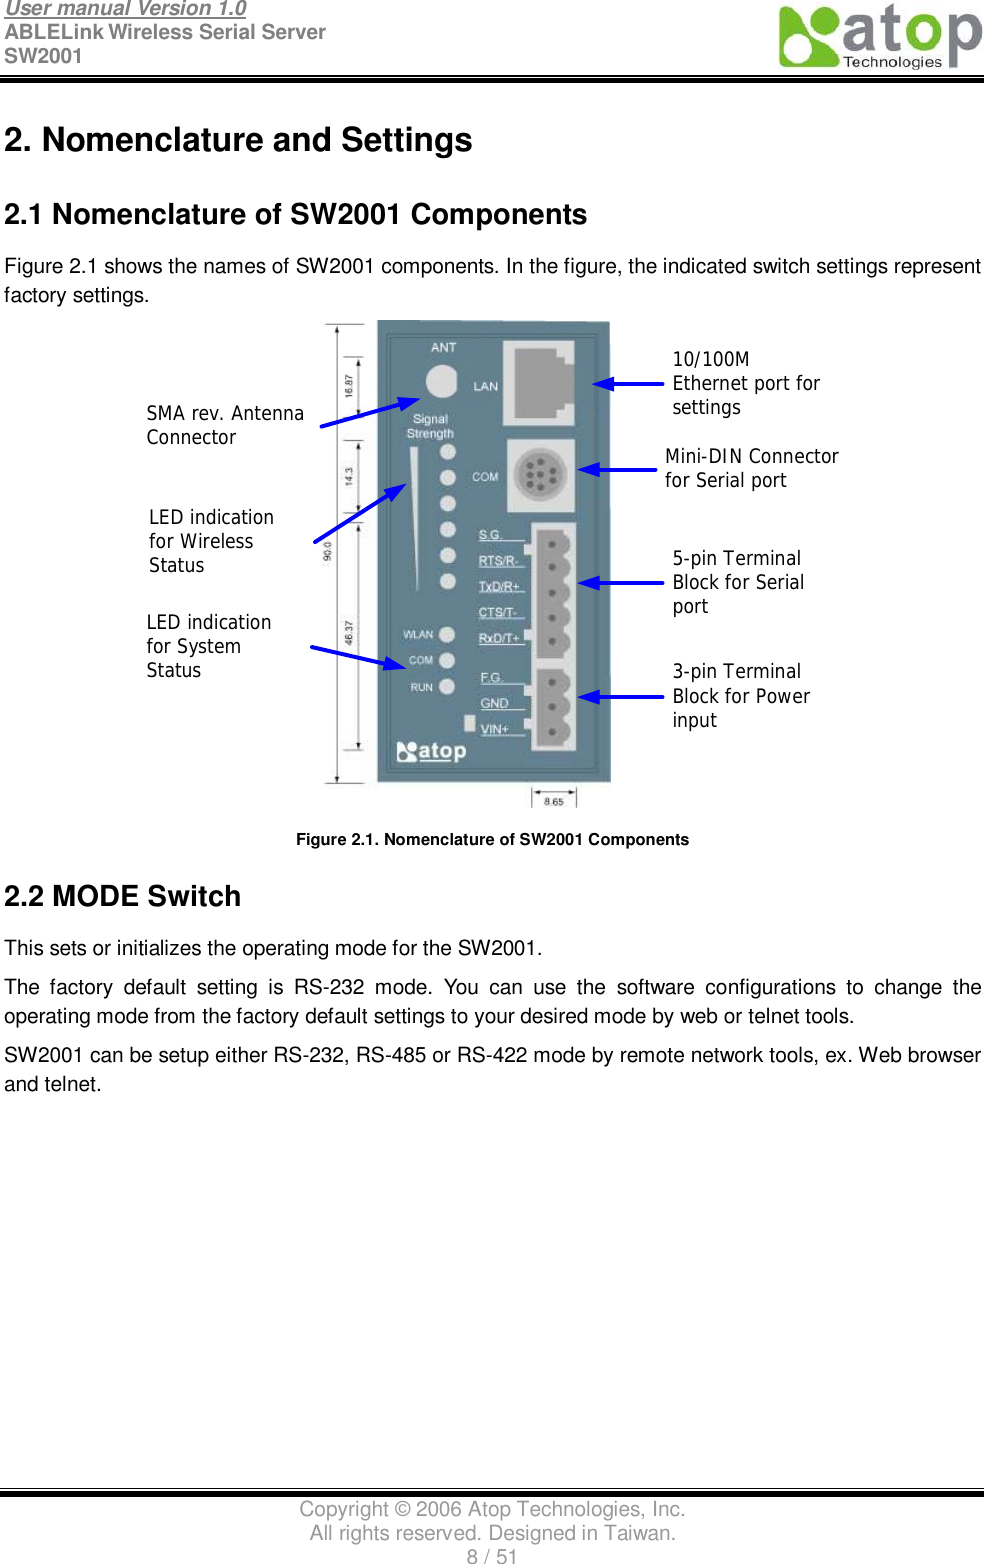 User manual Version 1.0 ABLELink Wireless Serial Server  SW2001                                                                                                                               Copyright © 2006 Atop Technologies, Inc. All rights reserved. Designed in Taiwan. 8 / 51   2. Nomenclature and Settings 2.1 Nomenclature of SW2001 Components Figure 2.1 shows the names of SW2001 components. In the figure, the indicated switch settings represent factory settings. 10/100MEthernet port forsettingsMini-DIN Connectorfor Serial port5-pin TerminalBlock for Serialport3-pin TerminalBlock for PowerinputSMA rev. AntennaConnectorLED indicationfor WirelessStatusLED indicationfor SystemStatus Figure 2.1. Nomenclature of SW2001 Components 2.2 MODE Switch This sets or initializes the operating mode for the SW2001. The factory default setting is RS-232 mode. You can use the software configurations to change the operating mode from the factory default settings to your desired mode by web or telnet tools. SW2001 can be setup either RS-232, RS-485 or RS-422 mode by remote network tools, ex. Web browser and telnet. 